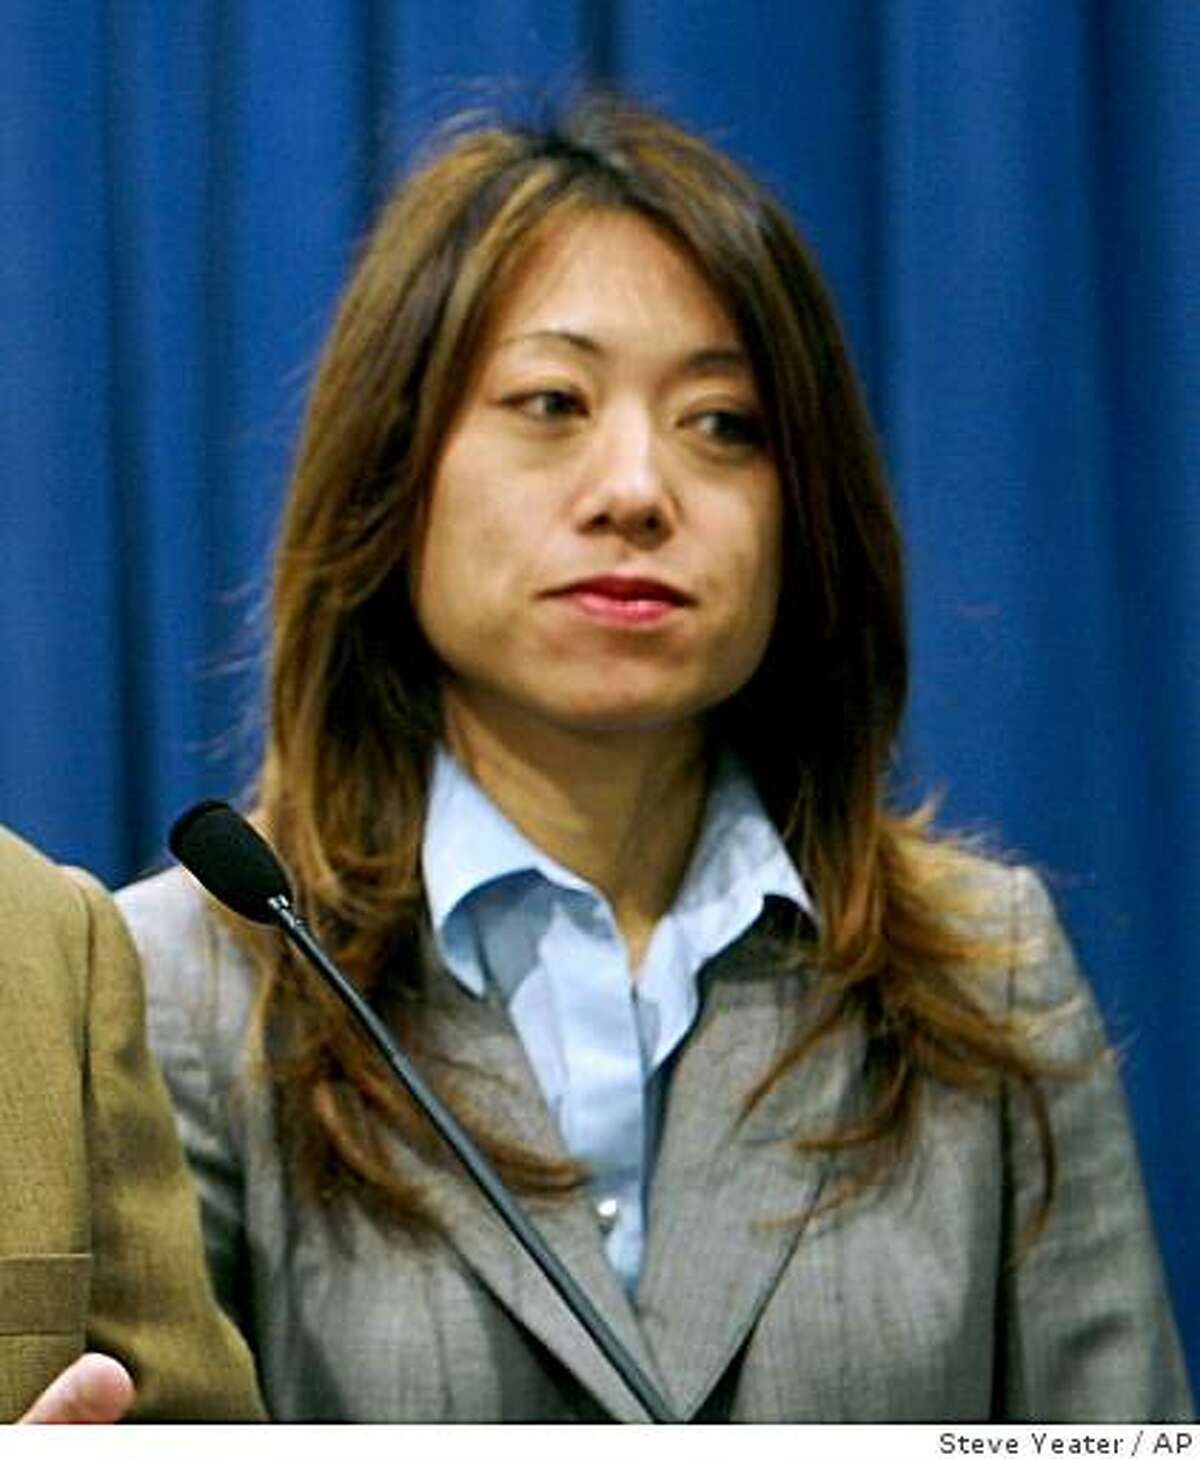 Assemblyman Anthony Adams, R-Hesperia, left, and Assemblywoman Fiona Ma, D-San Francisco, right, talk about a recent audit that raised concerns that sex offenders may be living in homes used for child daycare and foster care during a news conference at the Capitol in Sacramento, Calif., on Thursday, April 17, 2008.(AP Photo/Steve Yeater)